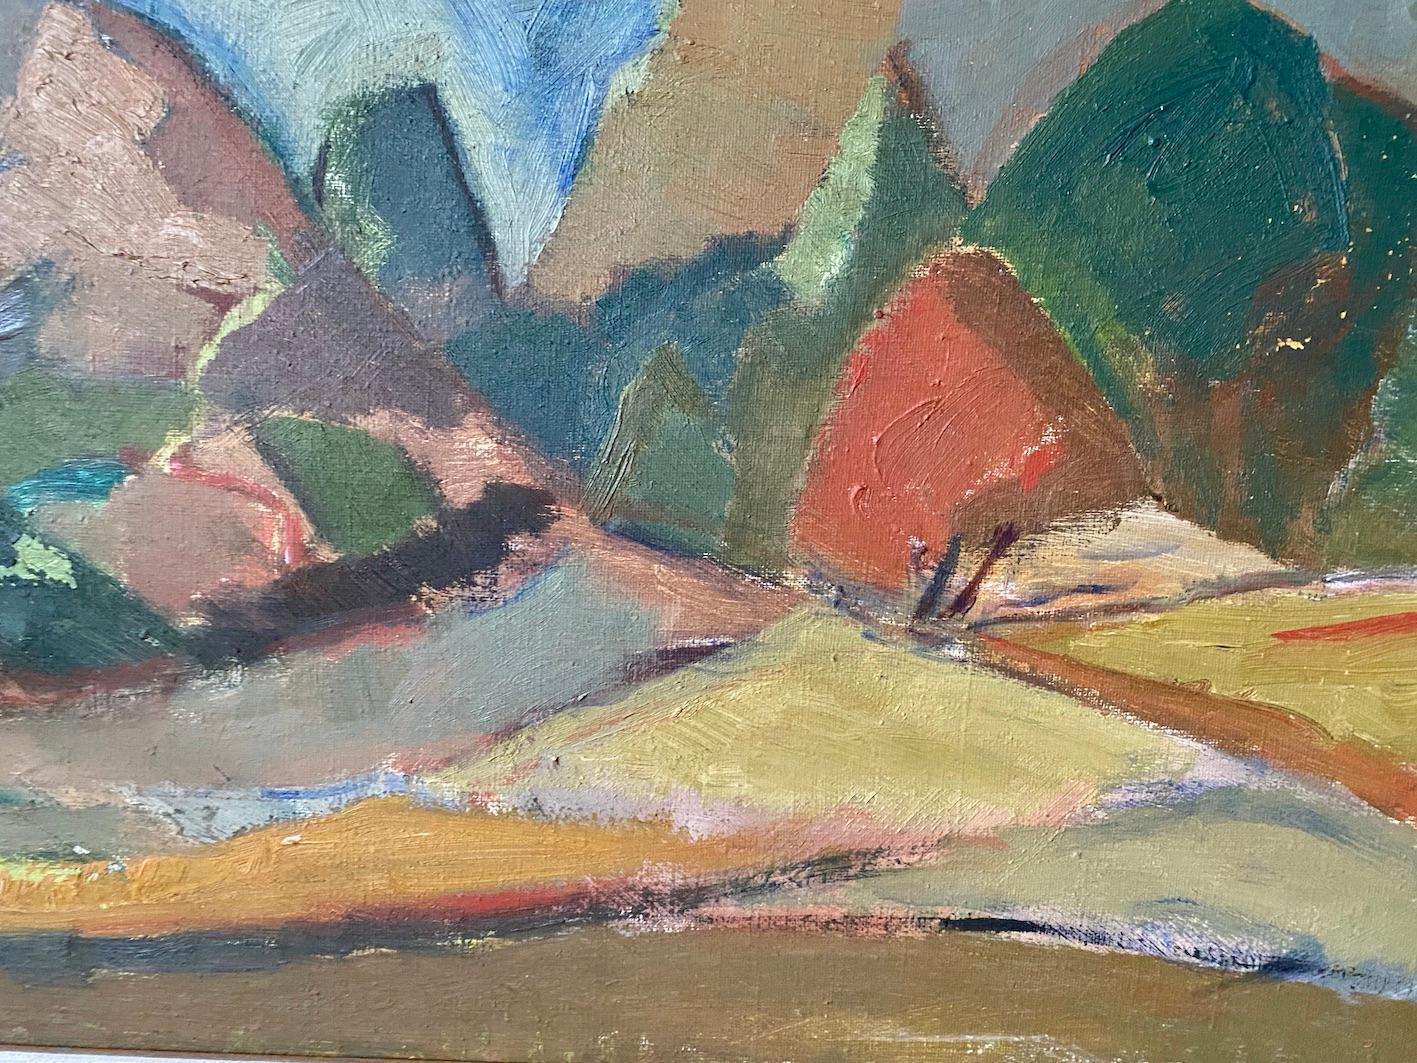 MOUNTAIN TRAIL
Size: 51 x 74 cm (including frame)
Oil on Canvas

A brilliantly executed and emotive modernist style oil painting, presenting a mountainous landscape with trees.

Executed in a semi-abstract manner, the artist has simplified forms